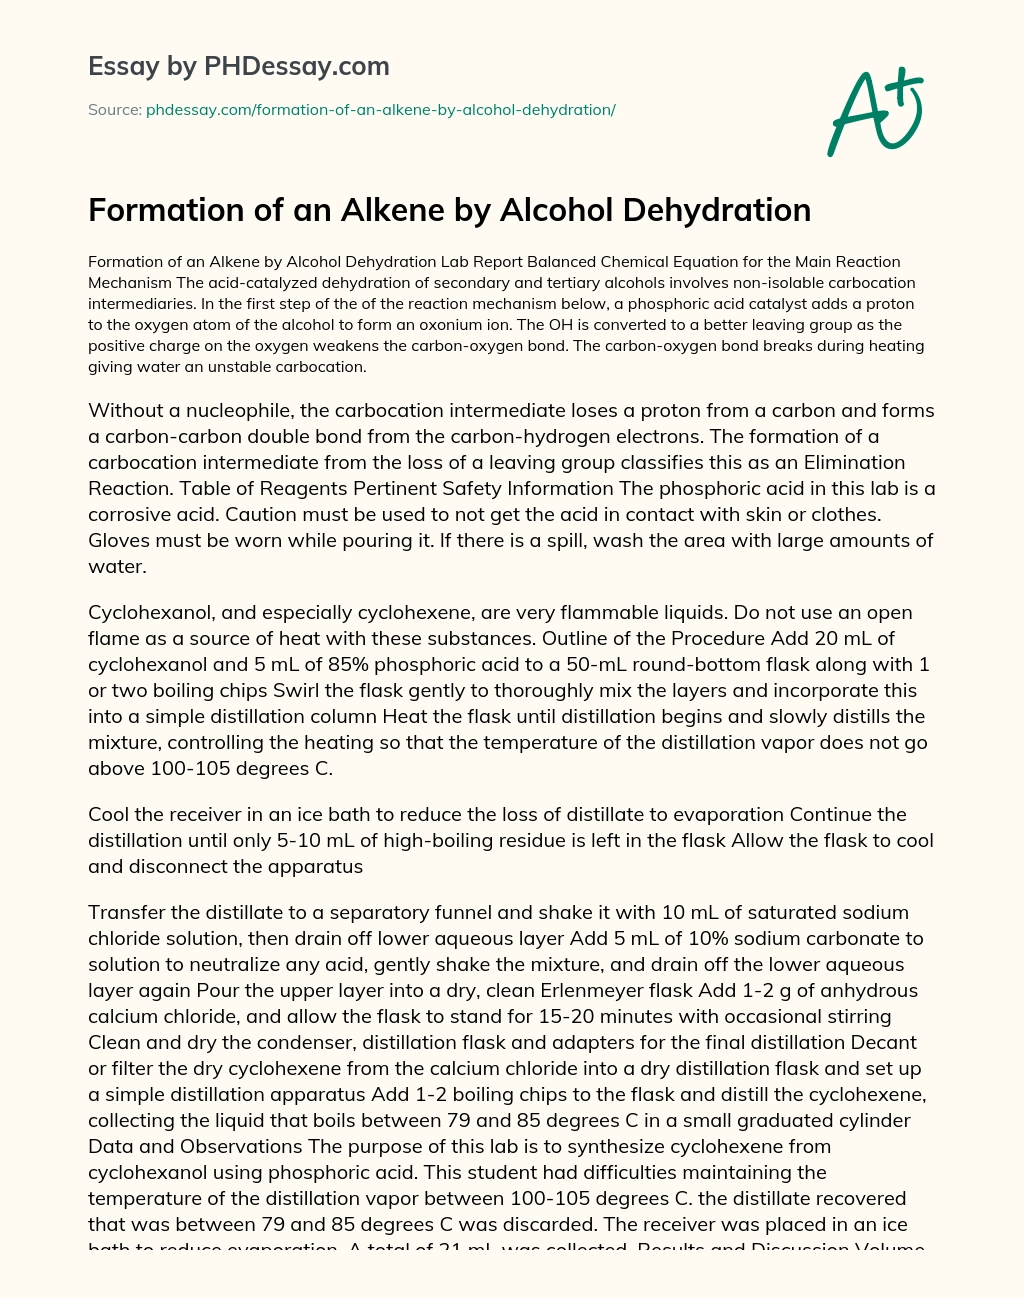 Formation of an Alkene by Alcohol Dehydration essay